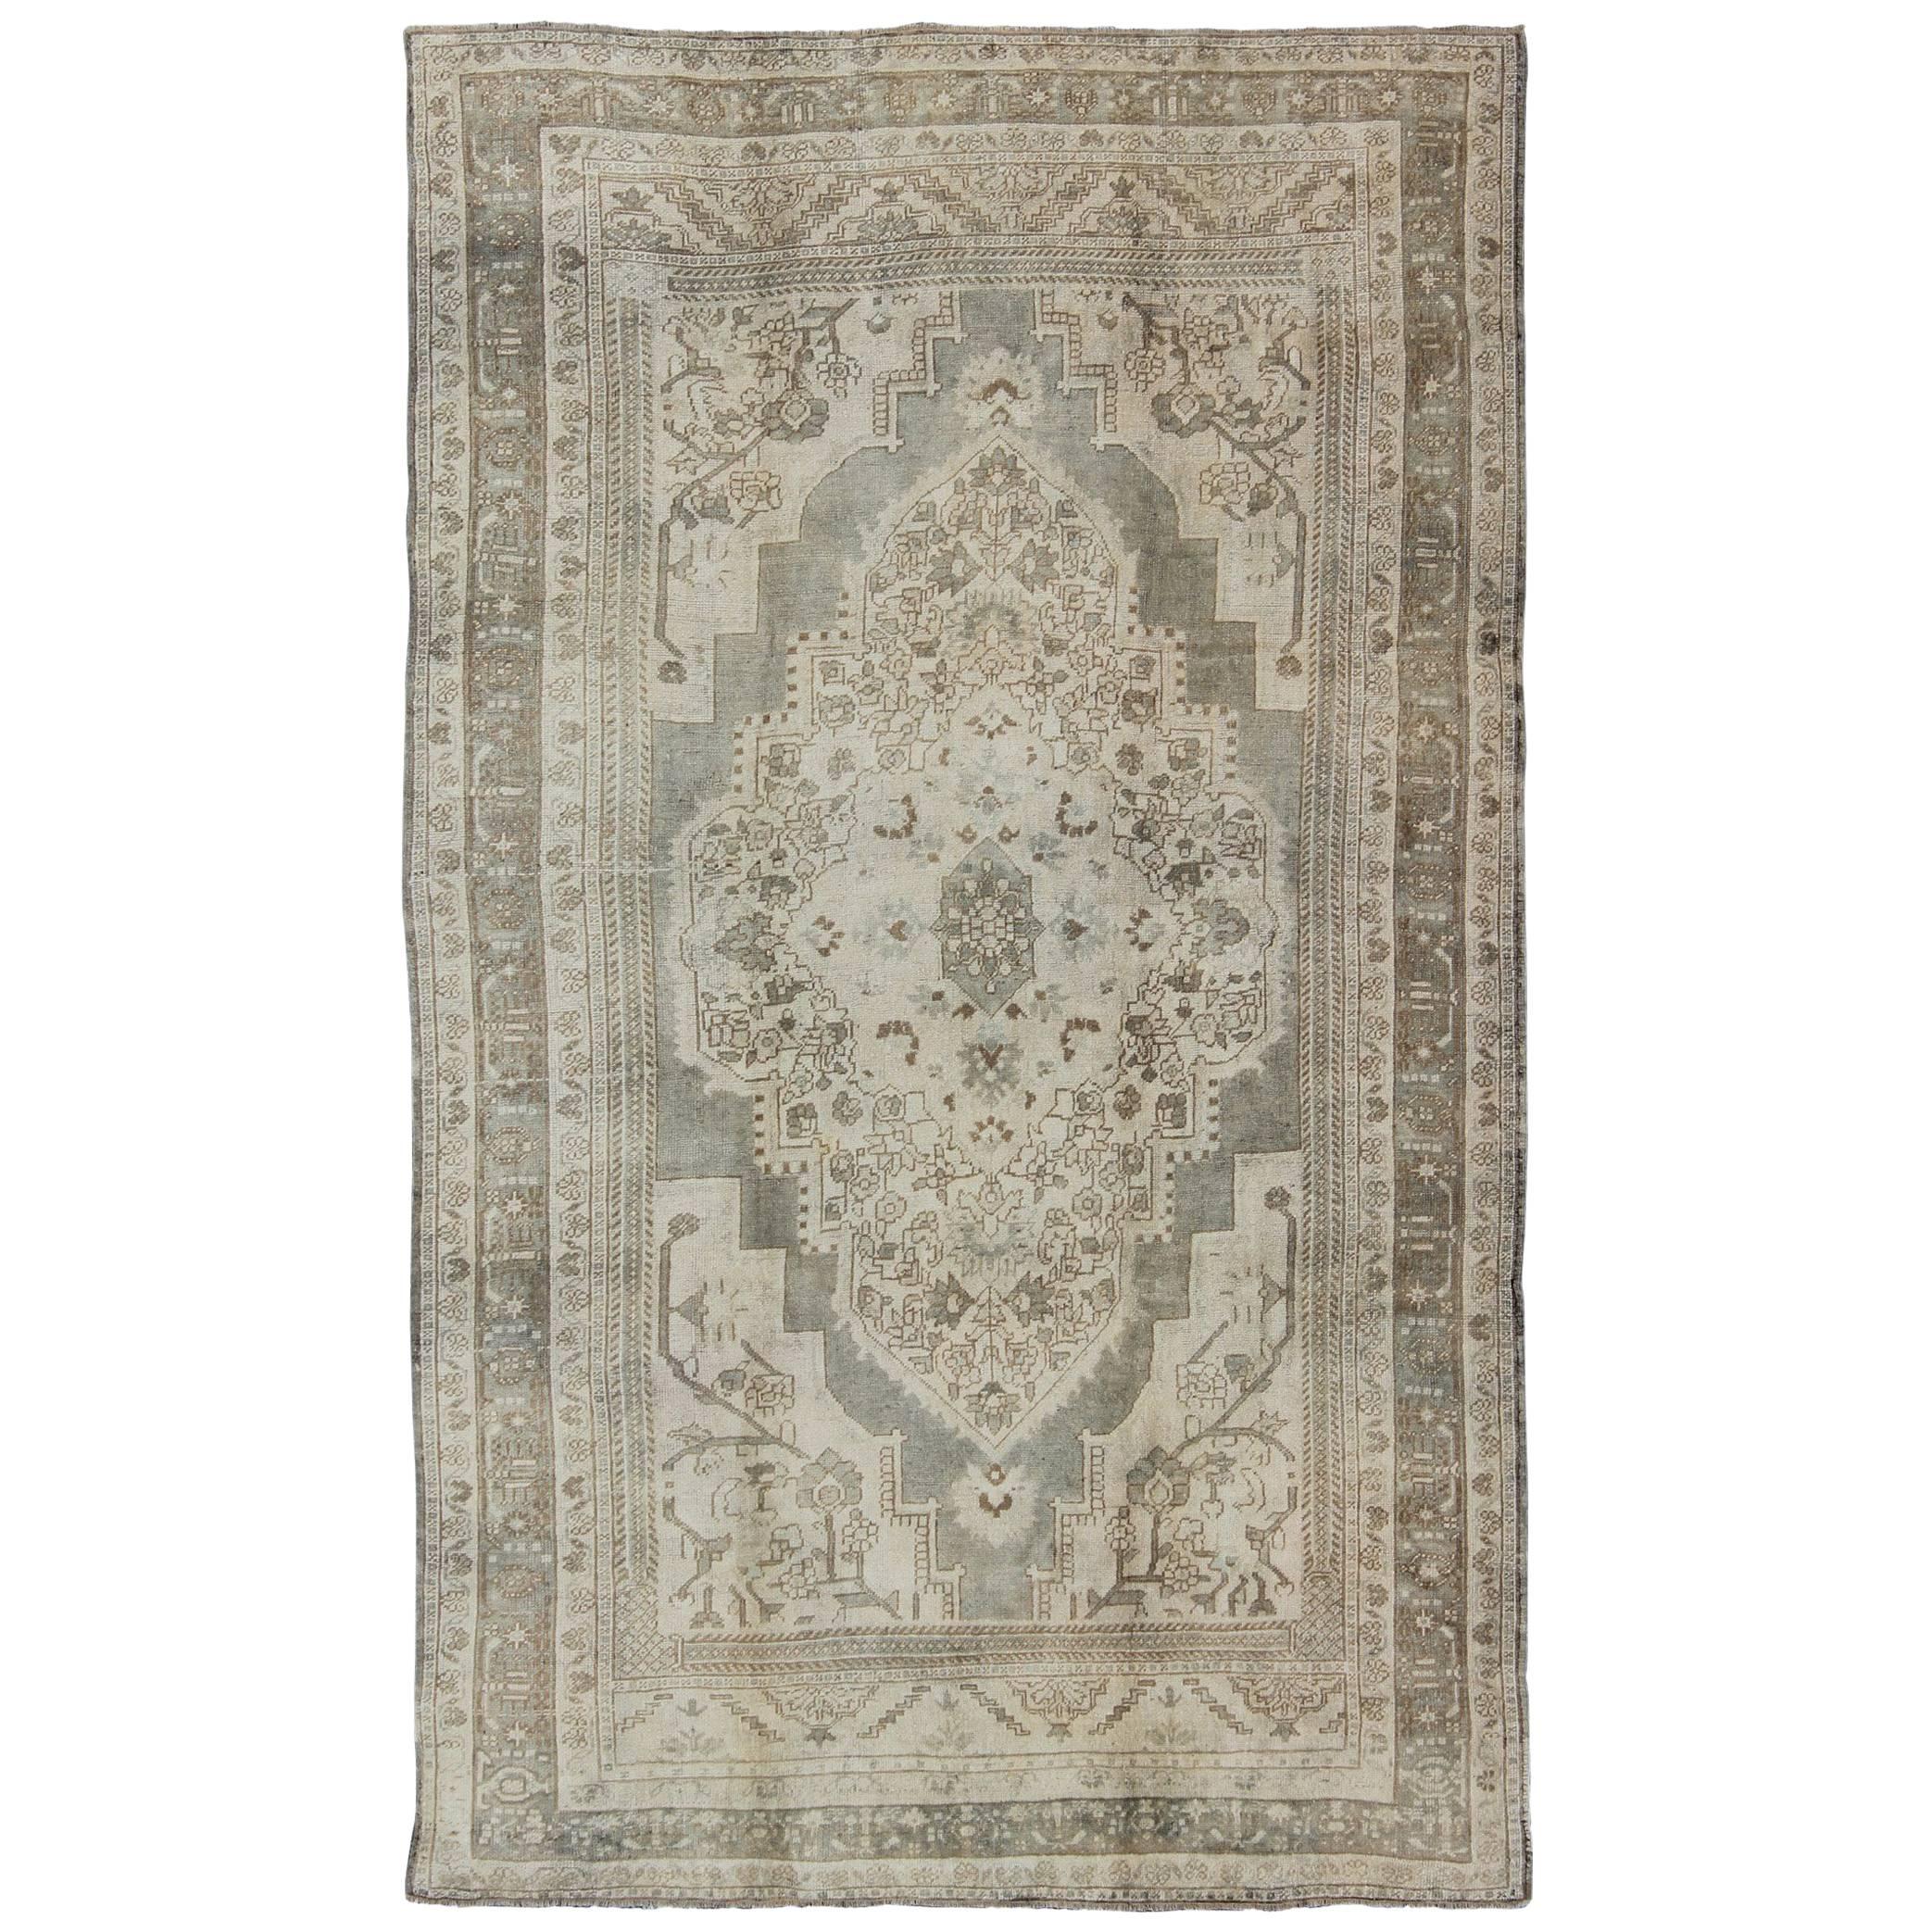 Vintage Turkish Oushak Rug with Floral Medallion Design in Ivory and Gray